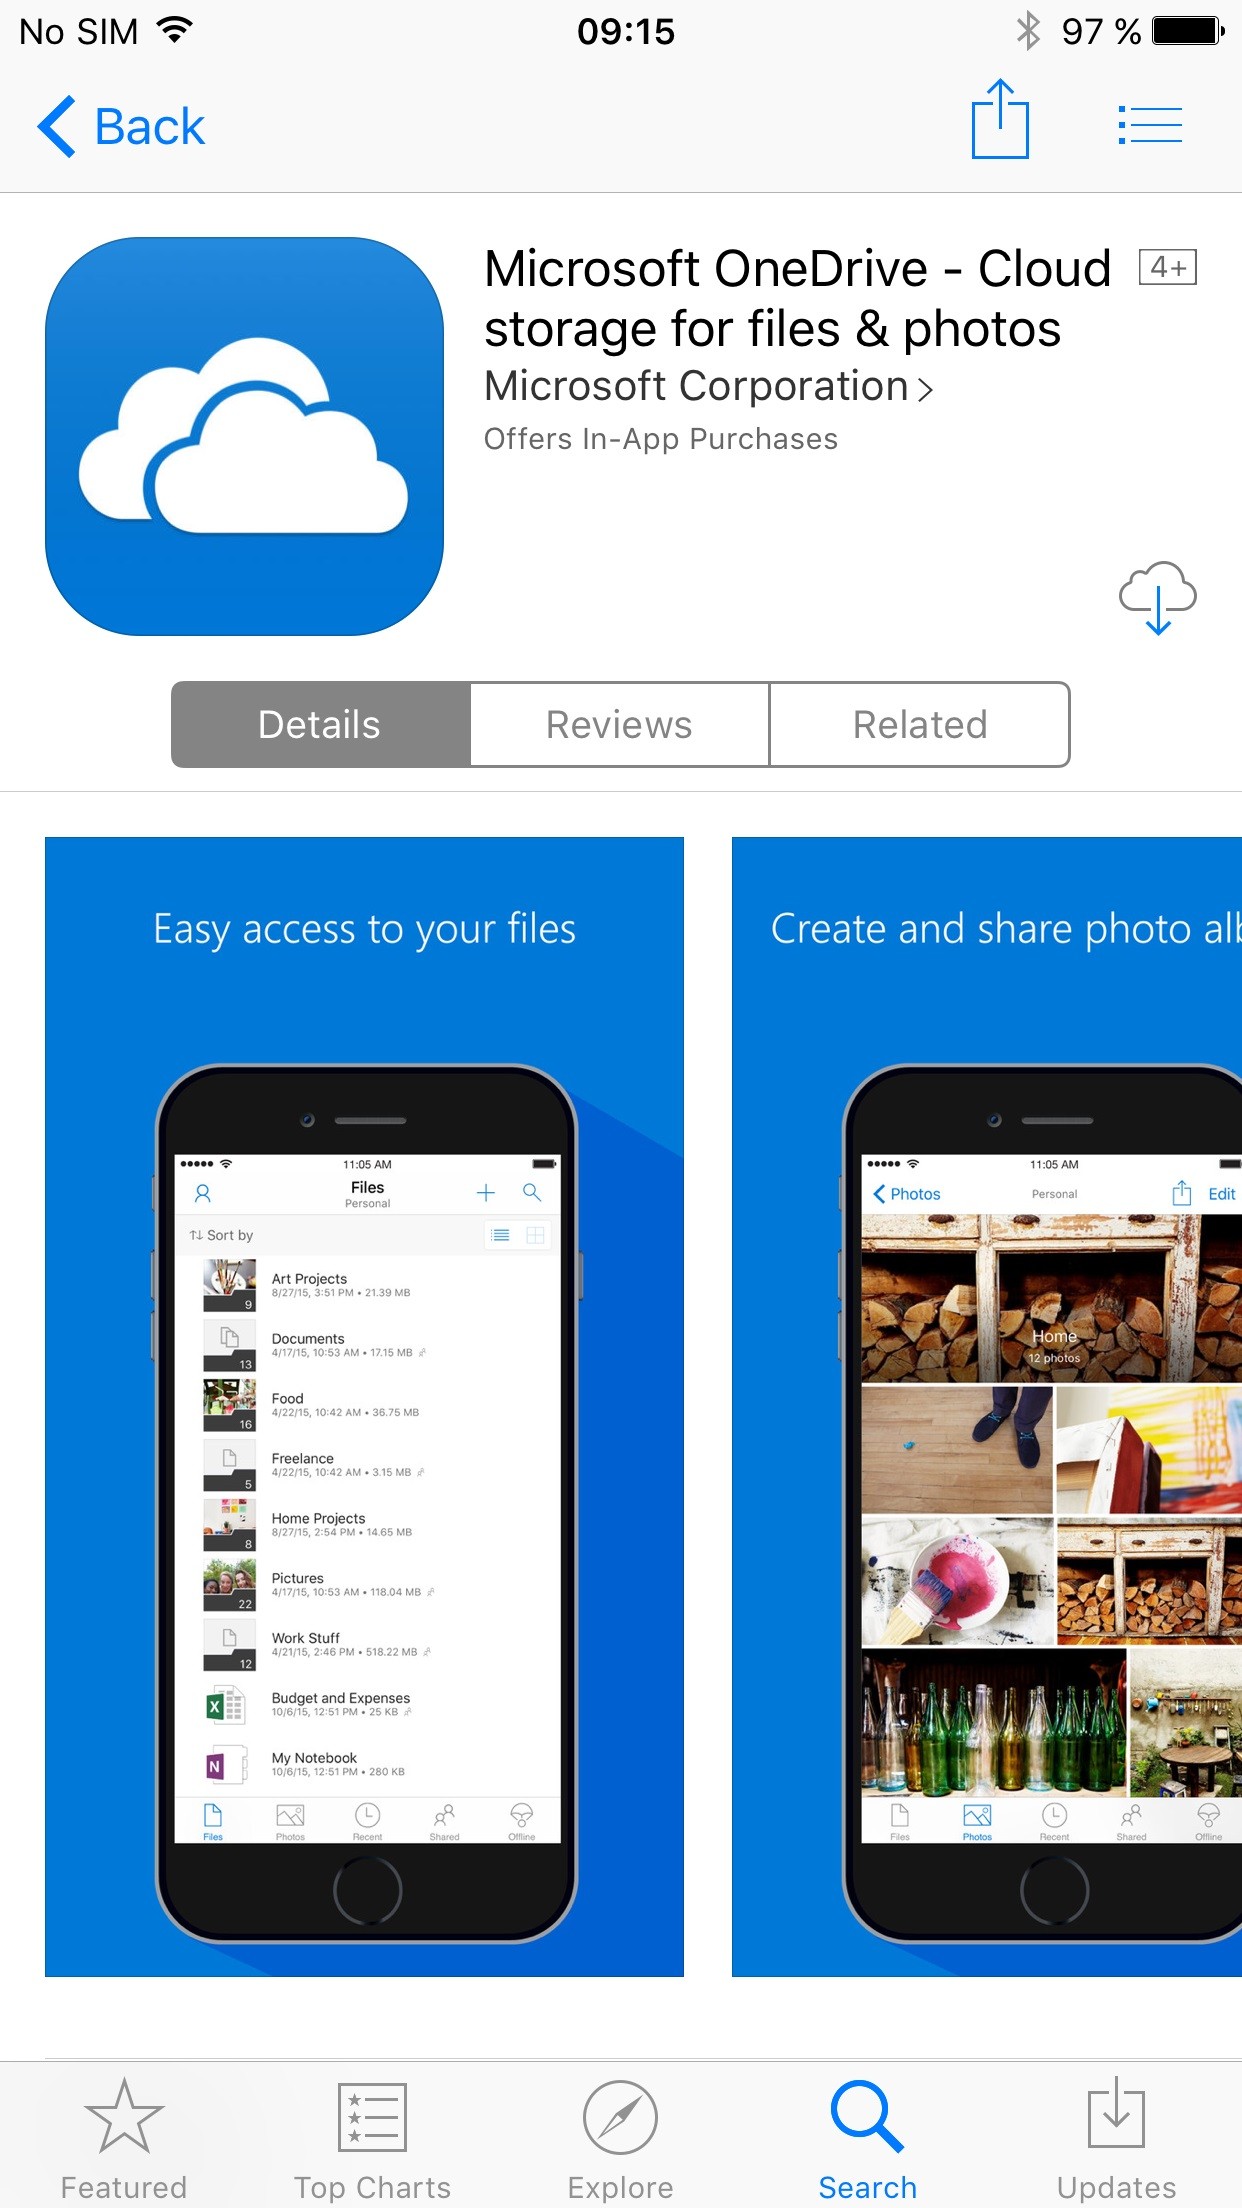 Microsoft Provides Iphone Users With New Onedrive Update